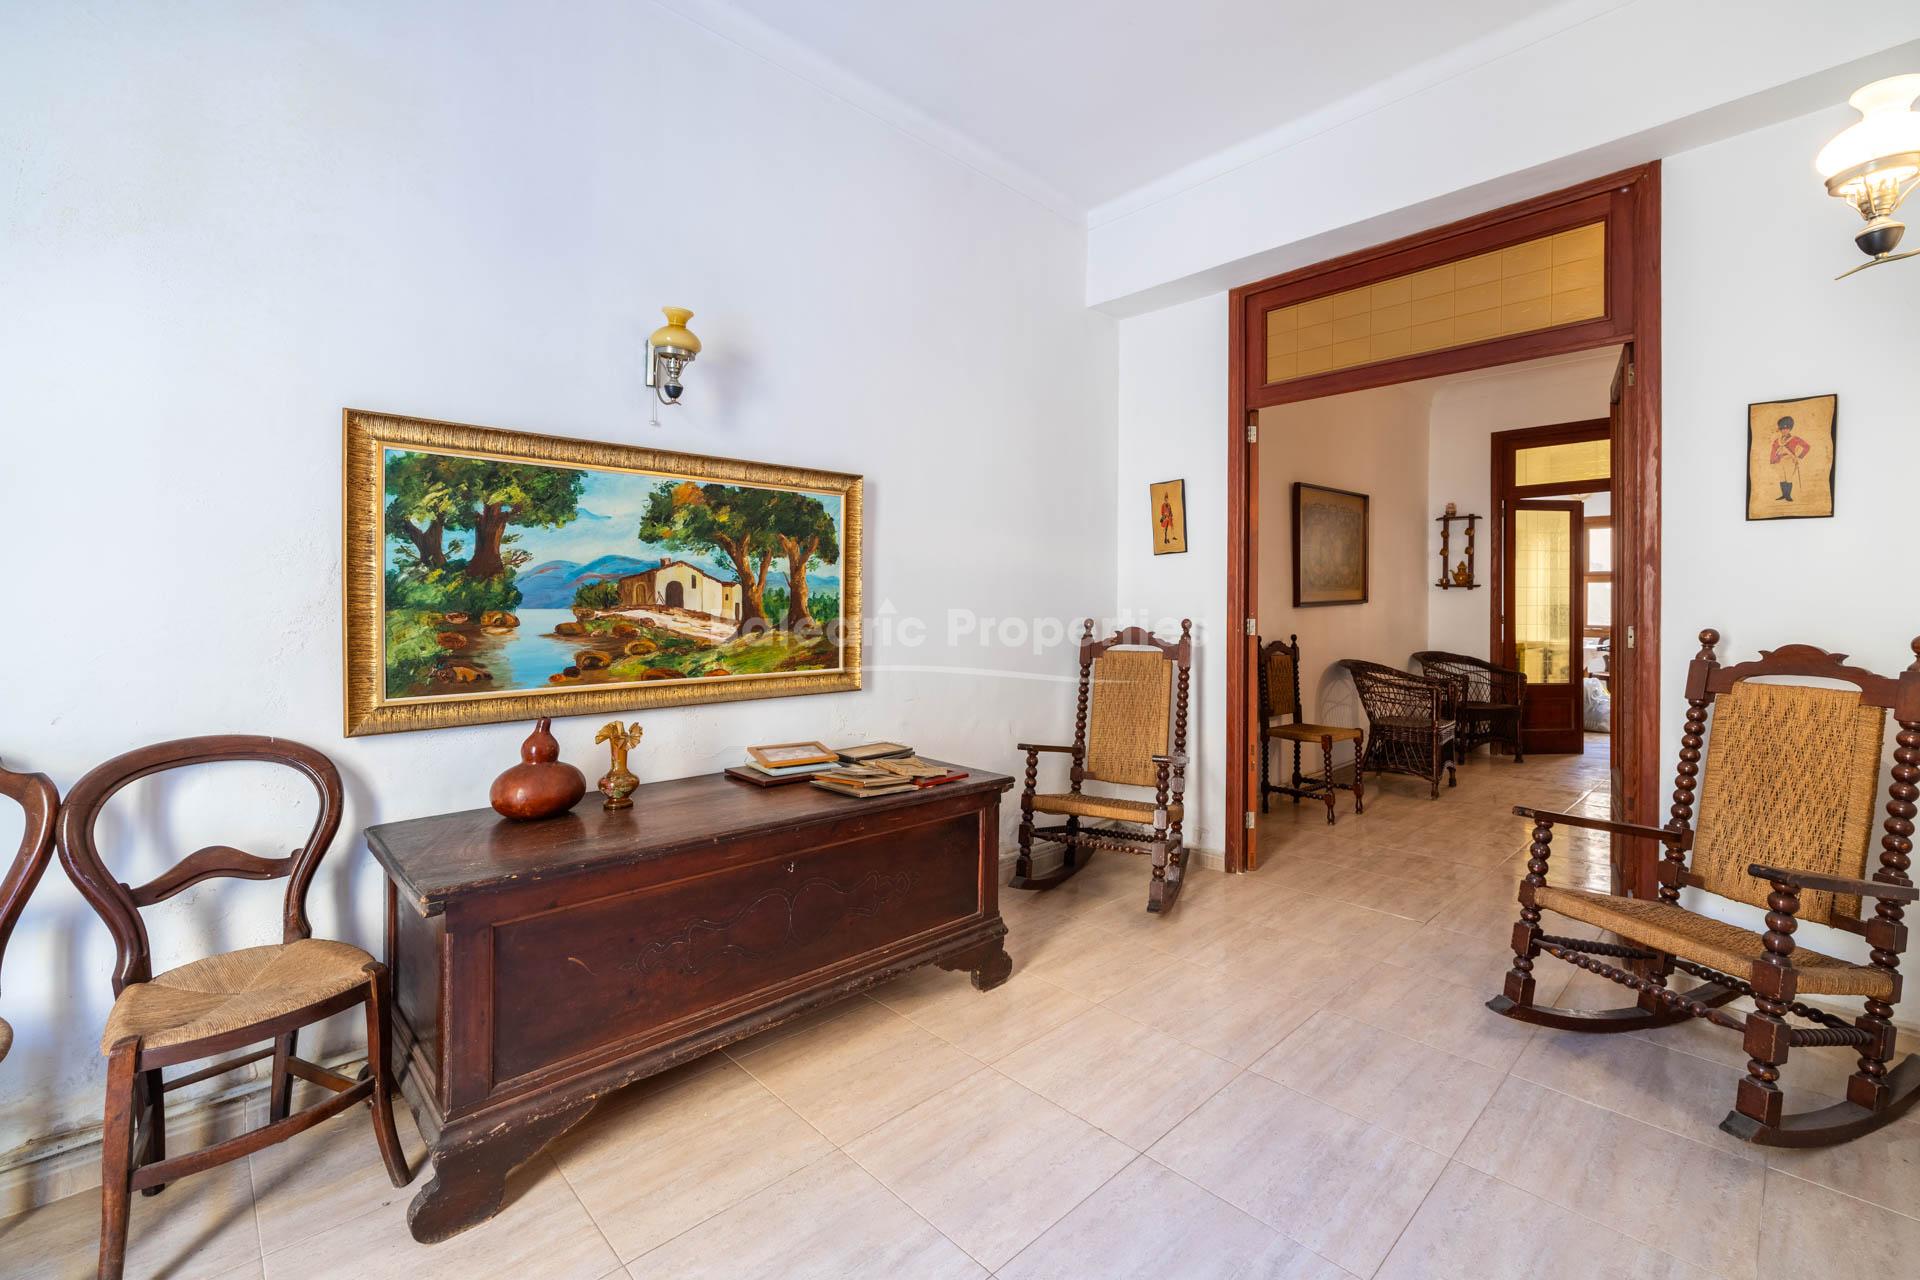 Large town house investment for sale in the heart of Sa Pobla, Mallorca